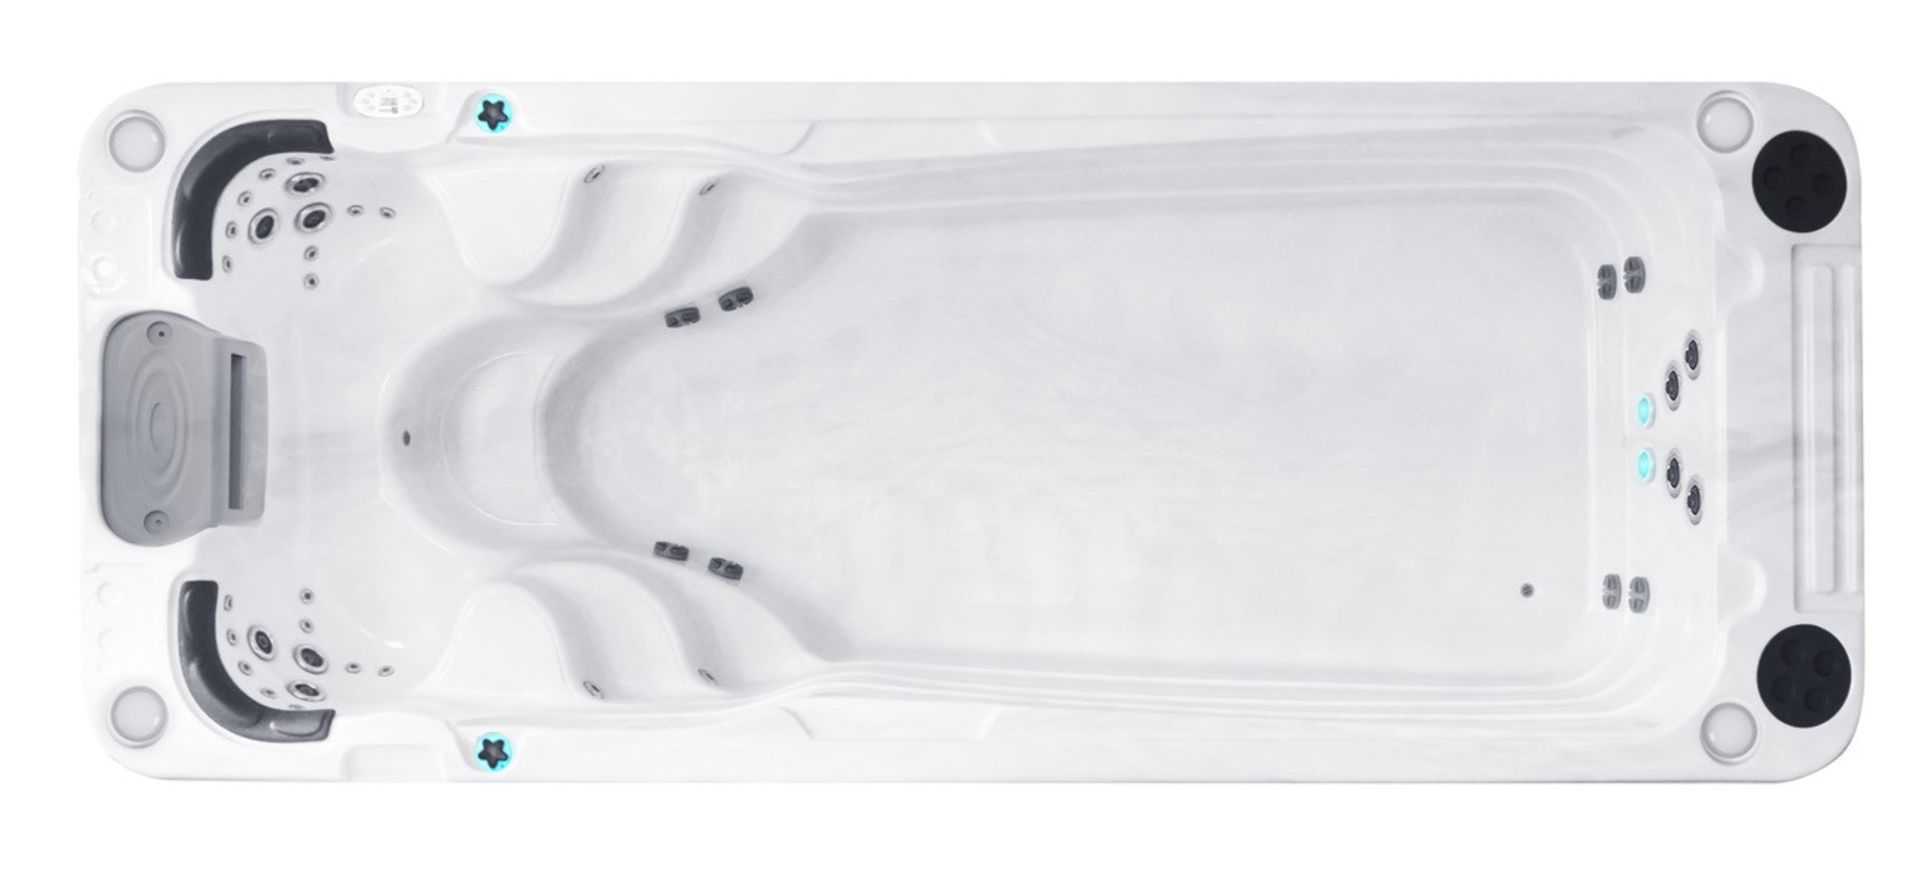 1 x Passion Spa Aquatic 2 Swim Spa - Brand New With Warranty - RRP: £20,500 - CL774 - Location: - Image 4 of 4